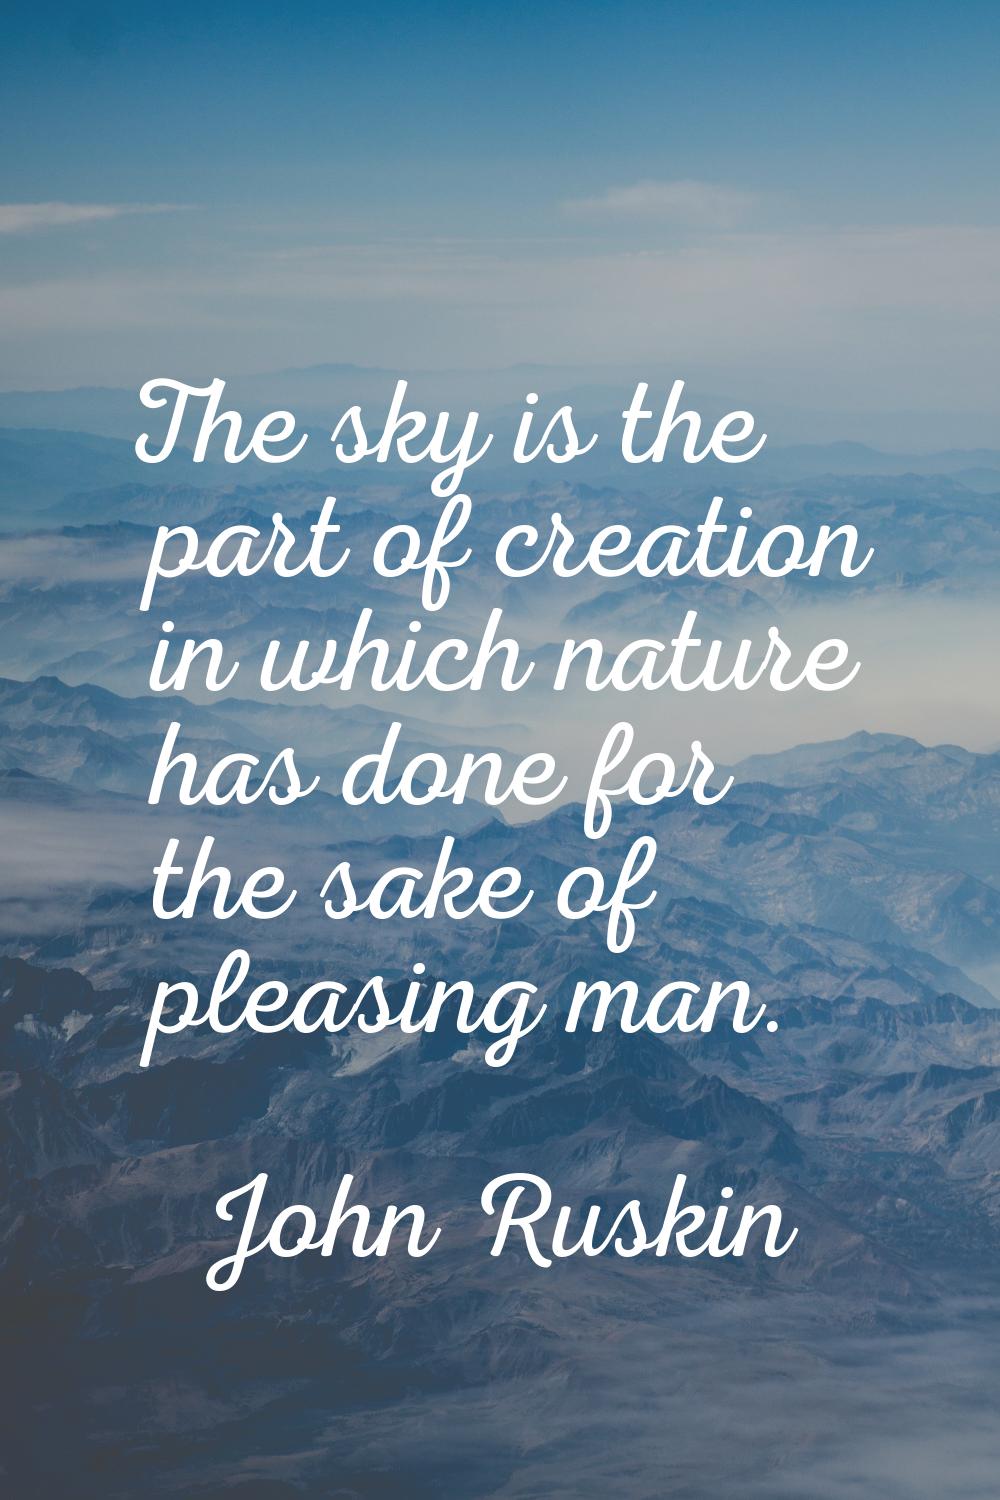 The sky is the part of creation in which nature has done for the sake of pleasing man.